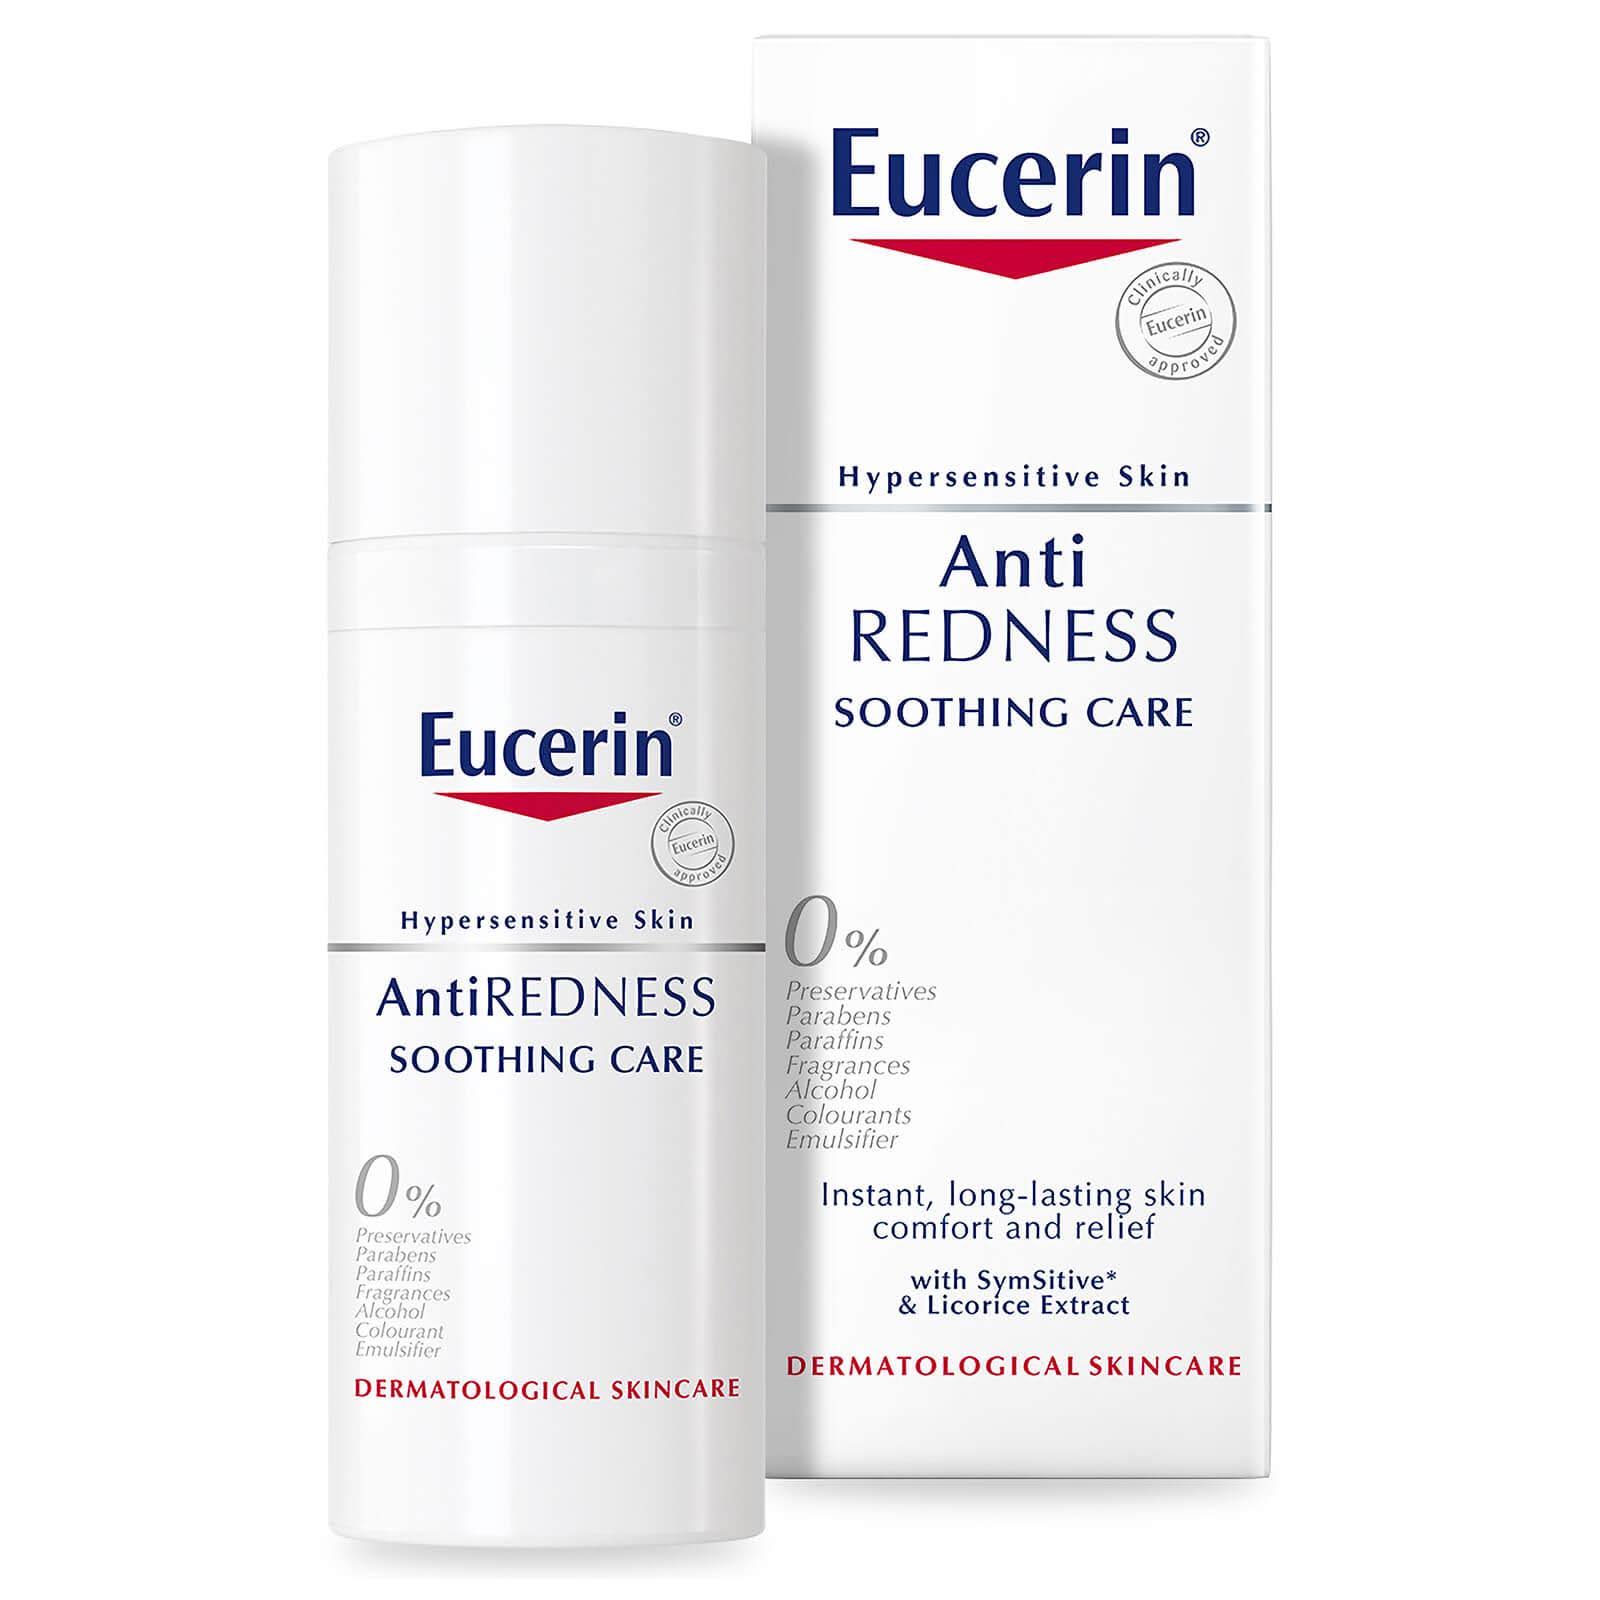 Eucerin Hypersensitive Anti Redness Soothing Care Cream - 50ml